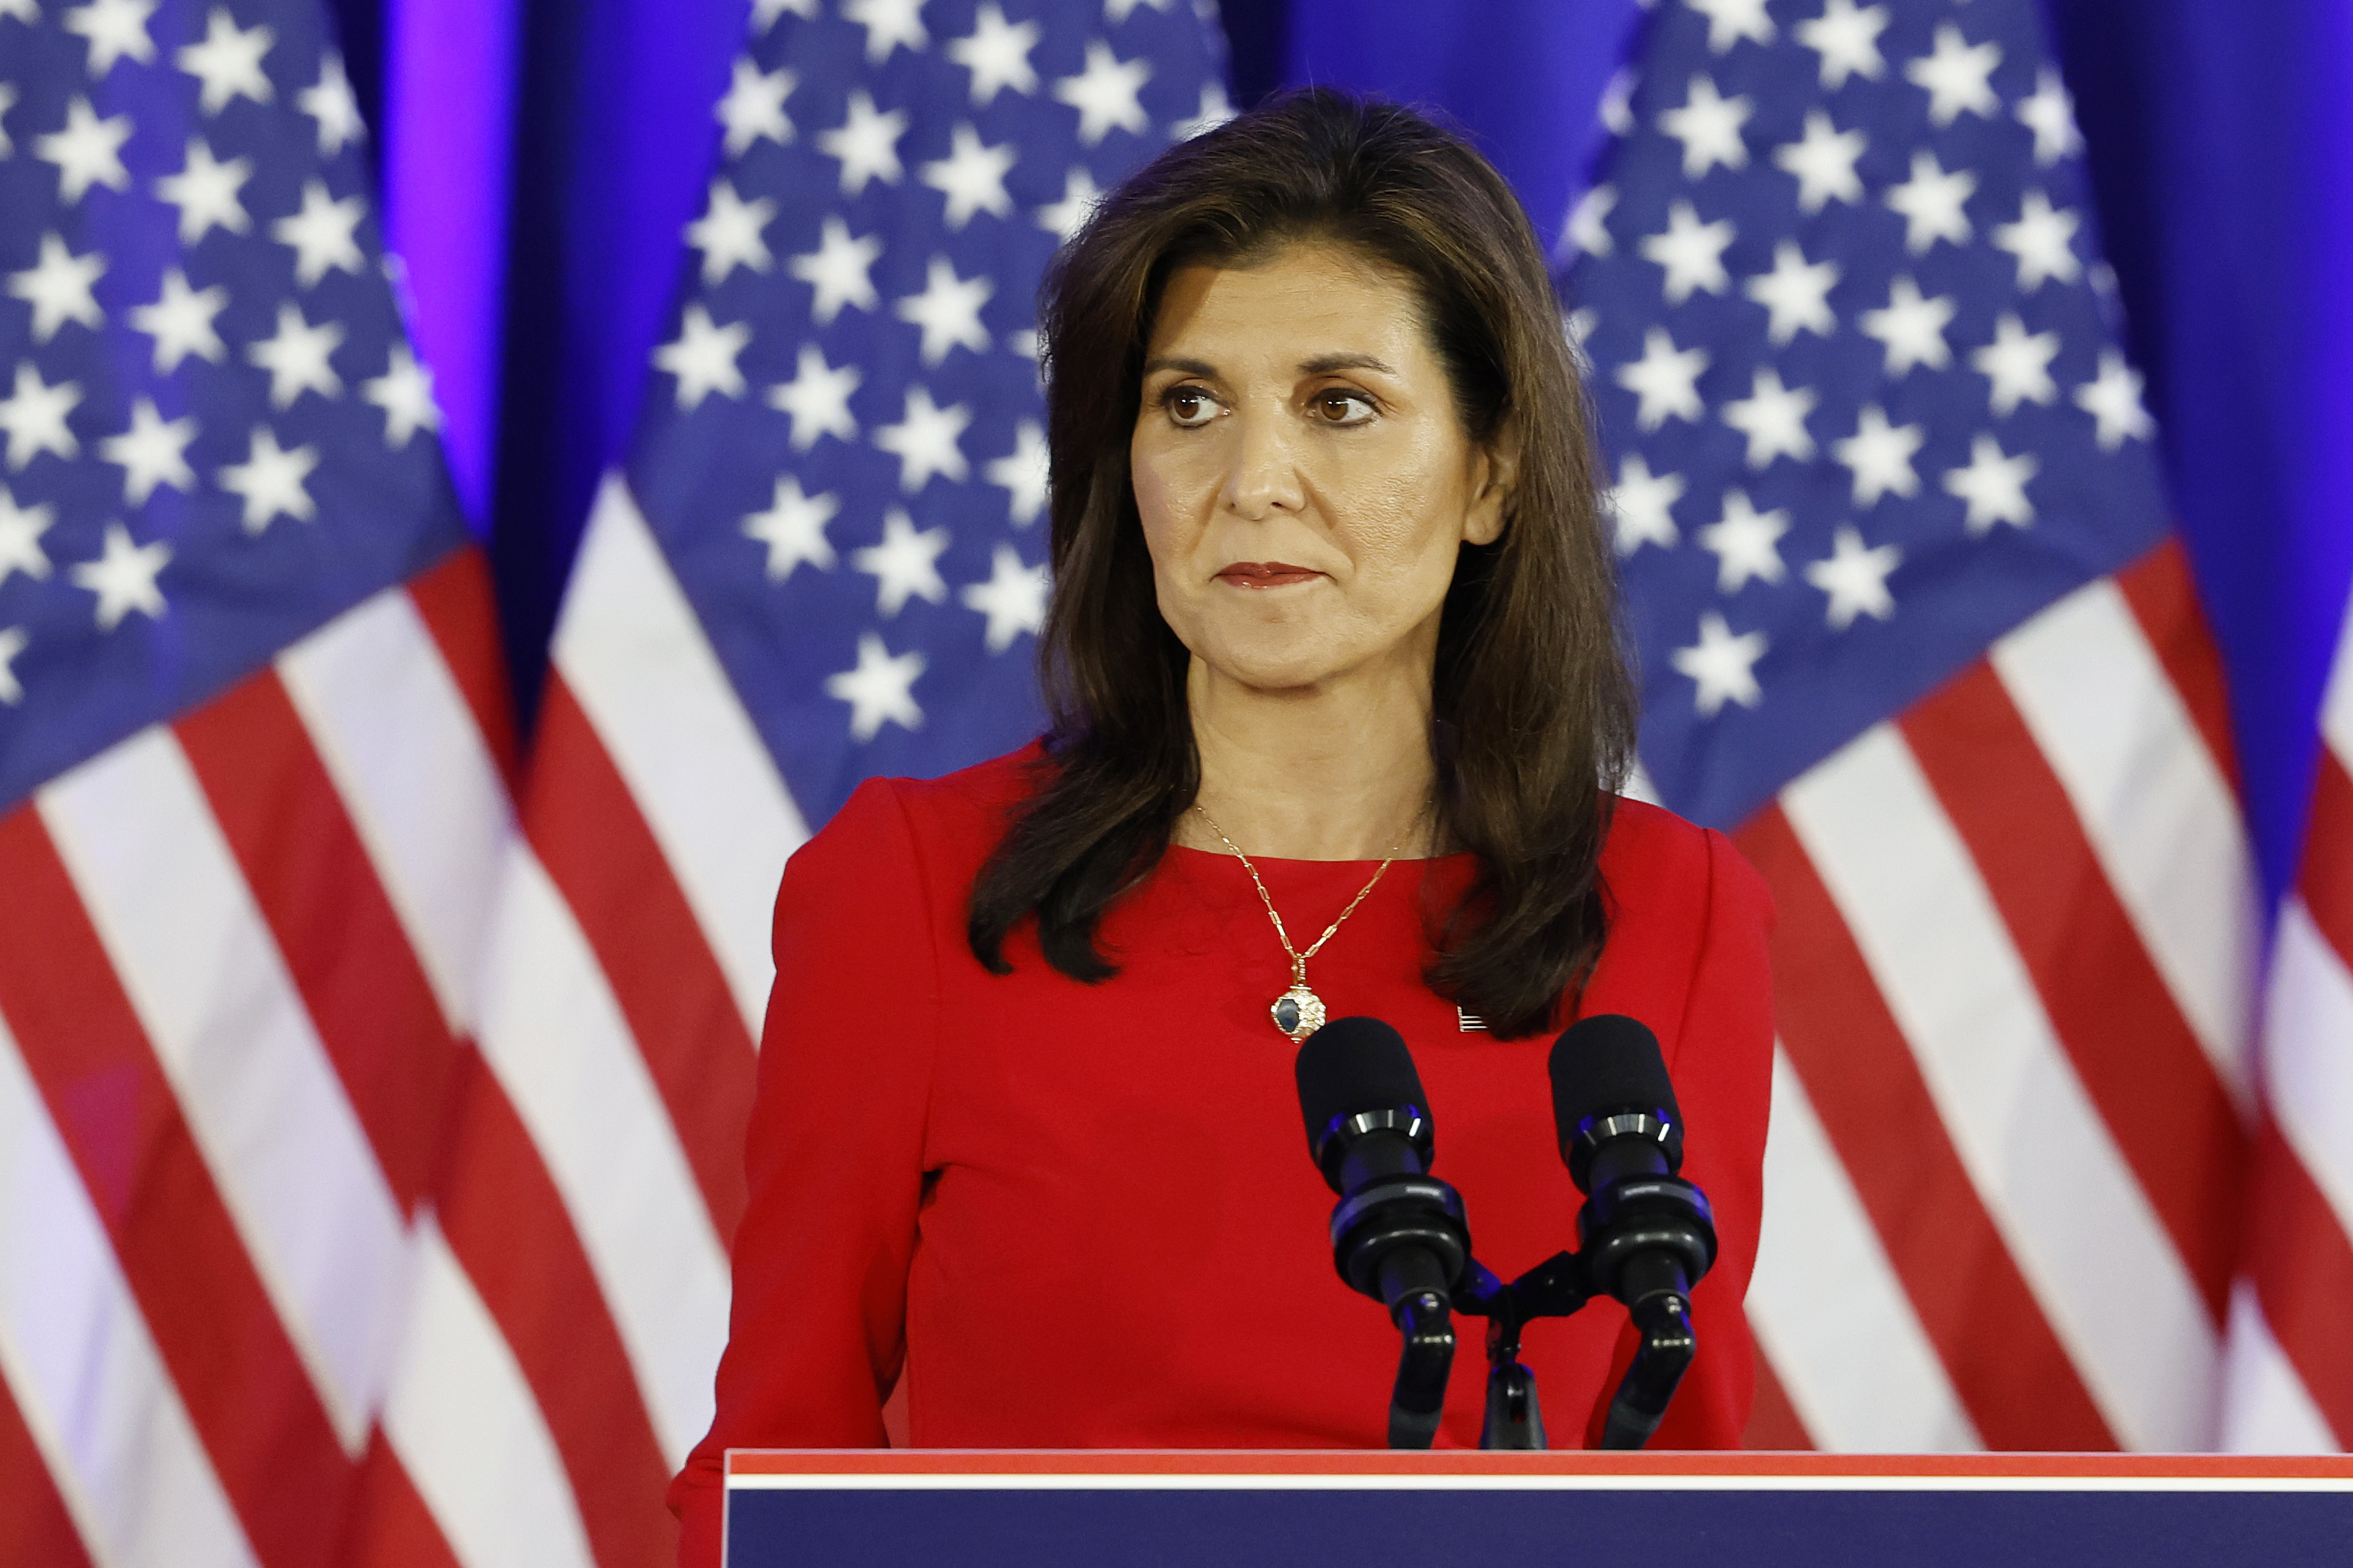 Nikki stands at a podium with multiple American flags in the background, wearing a red top and a necklace